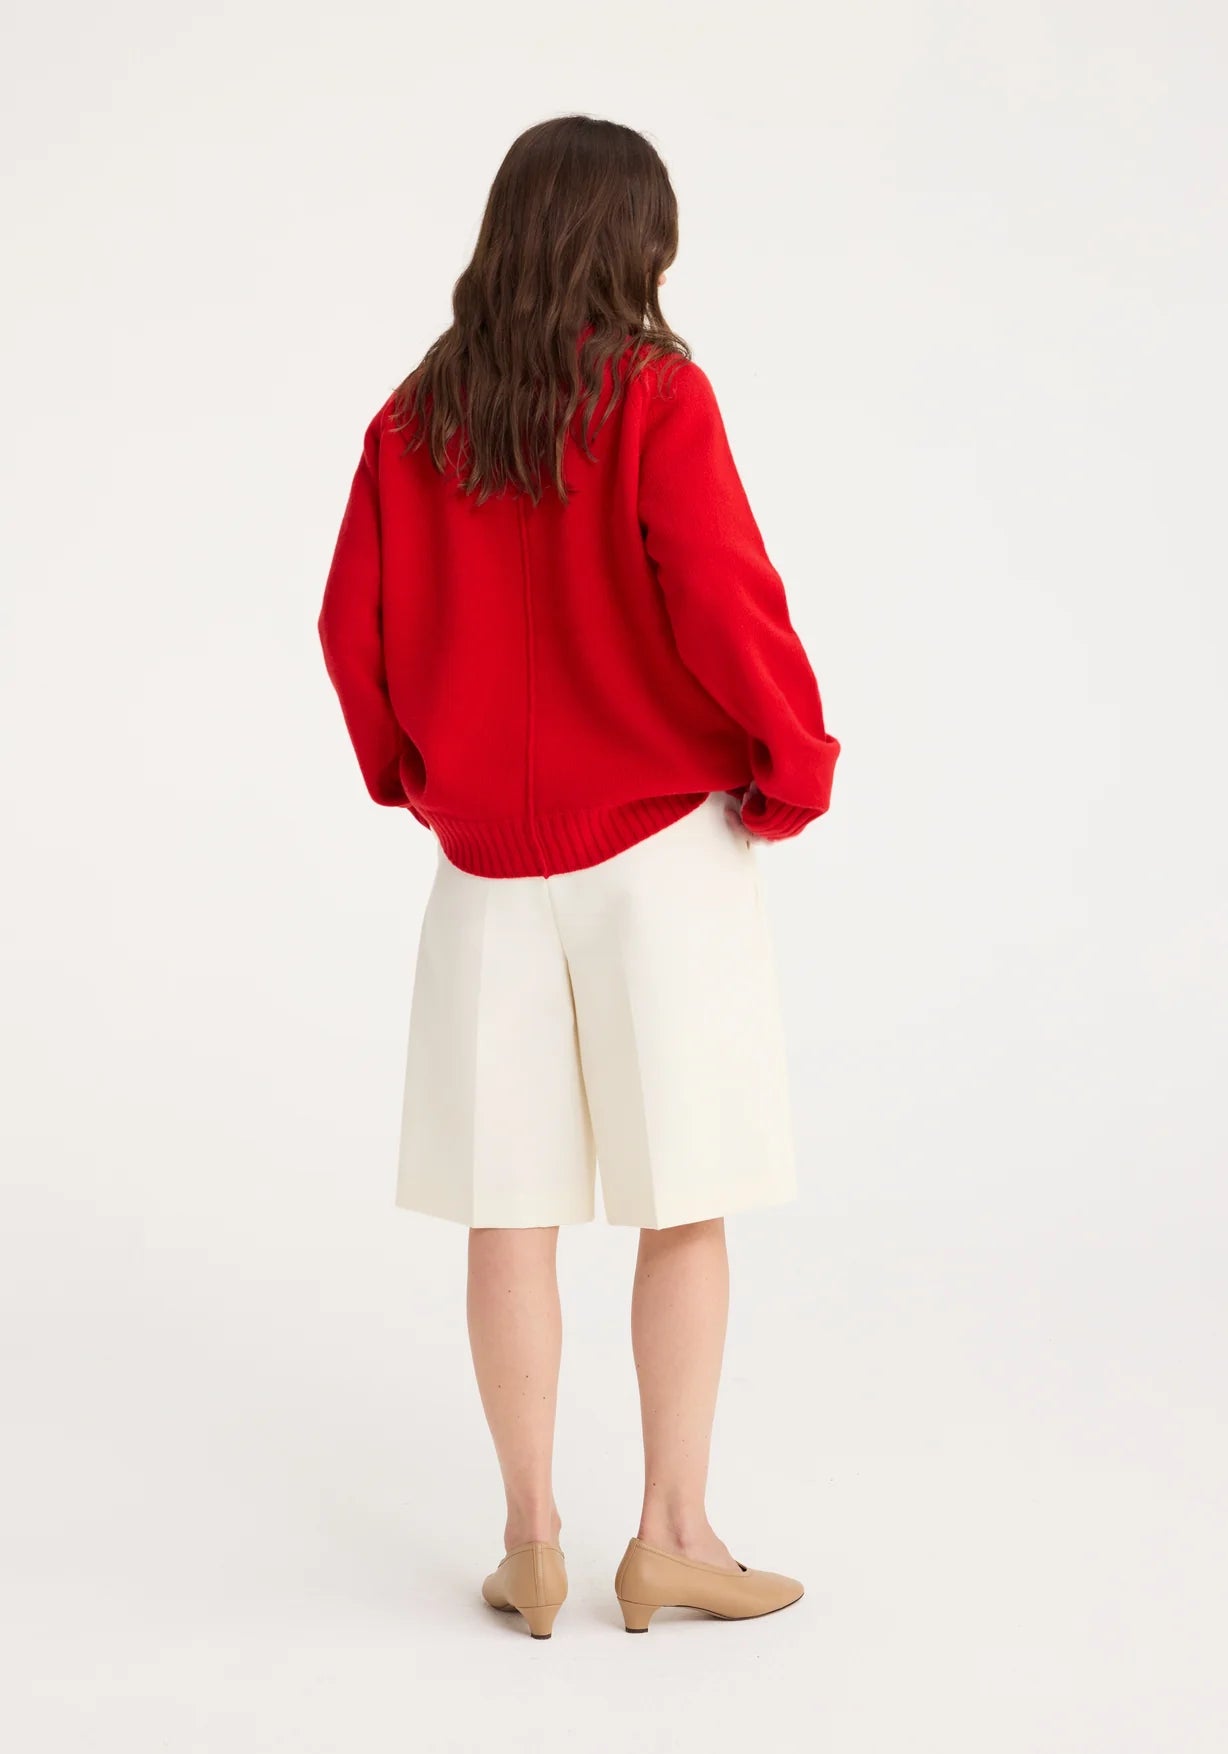 Wool Cashmere Crew Neck Sweater in Red